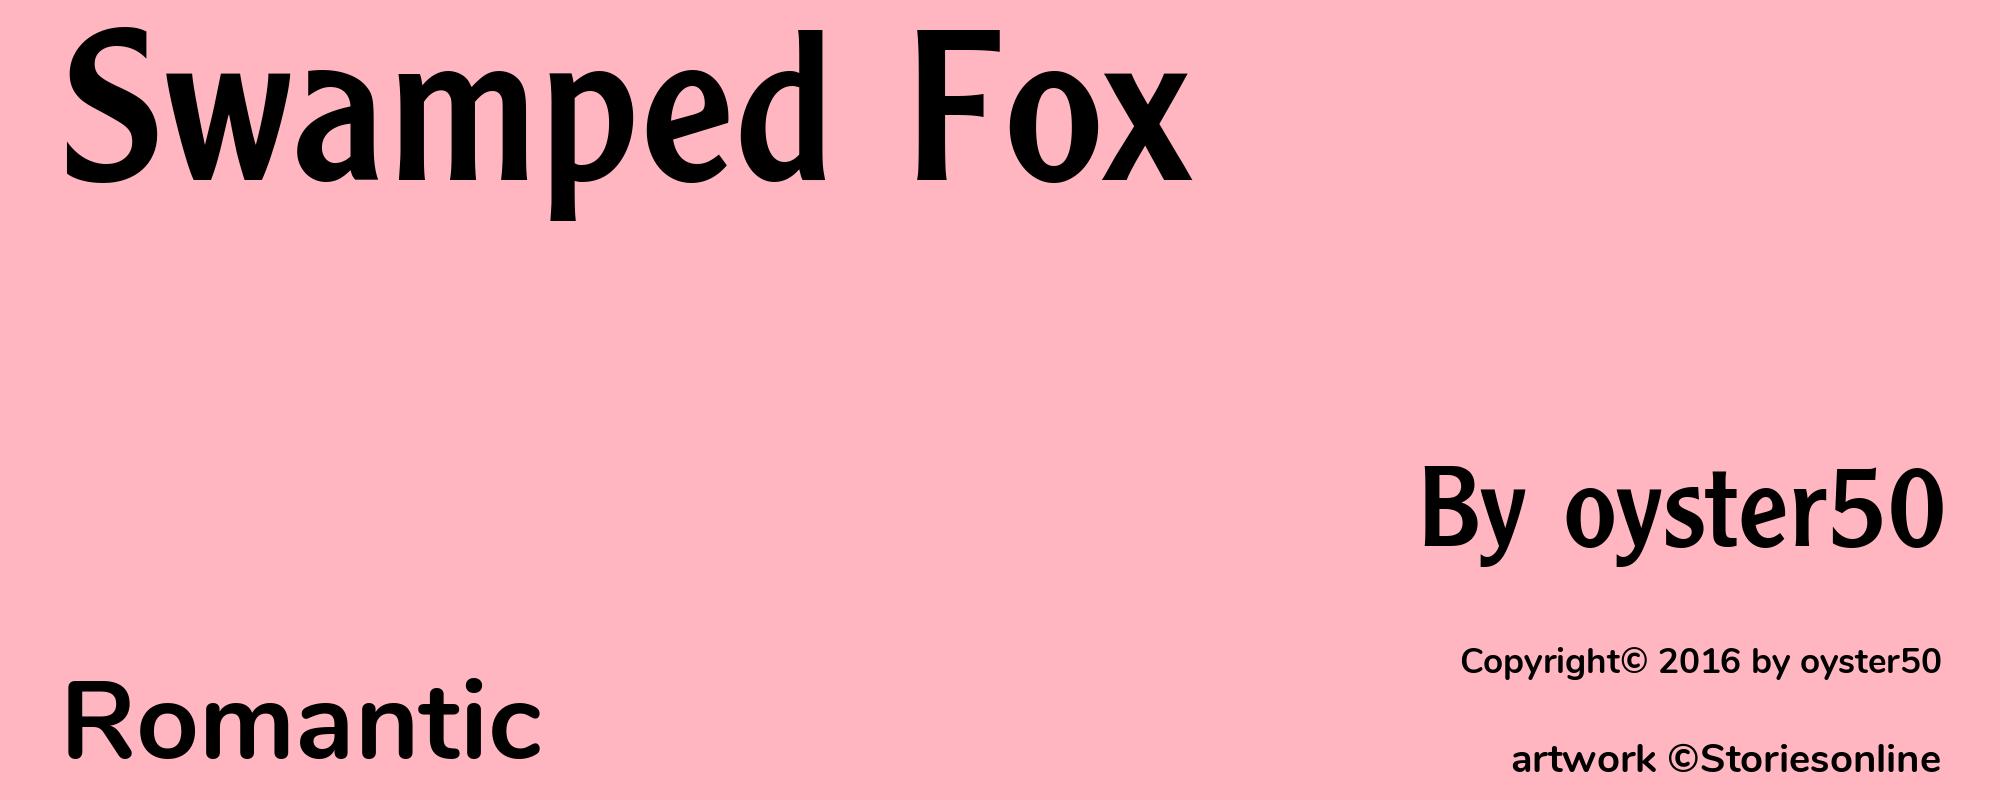 Swamped Fox - Cover